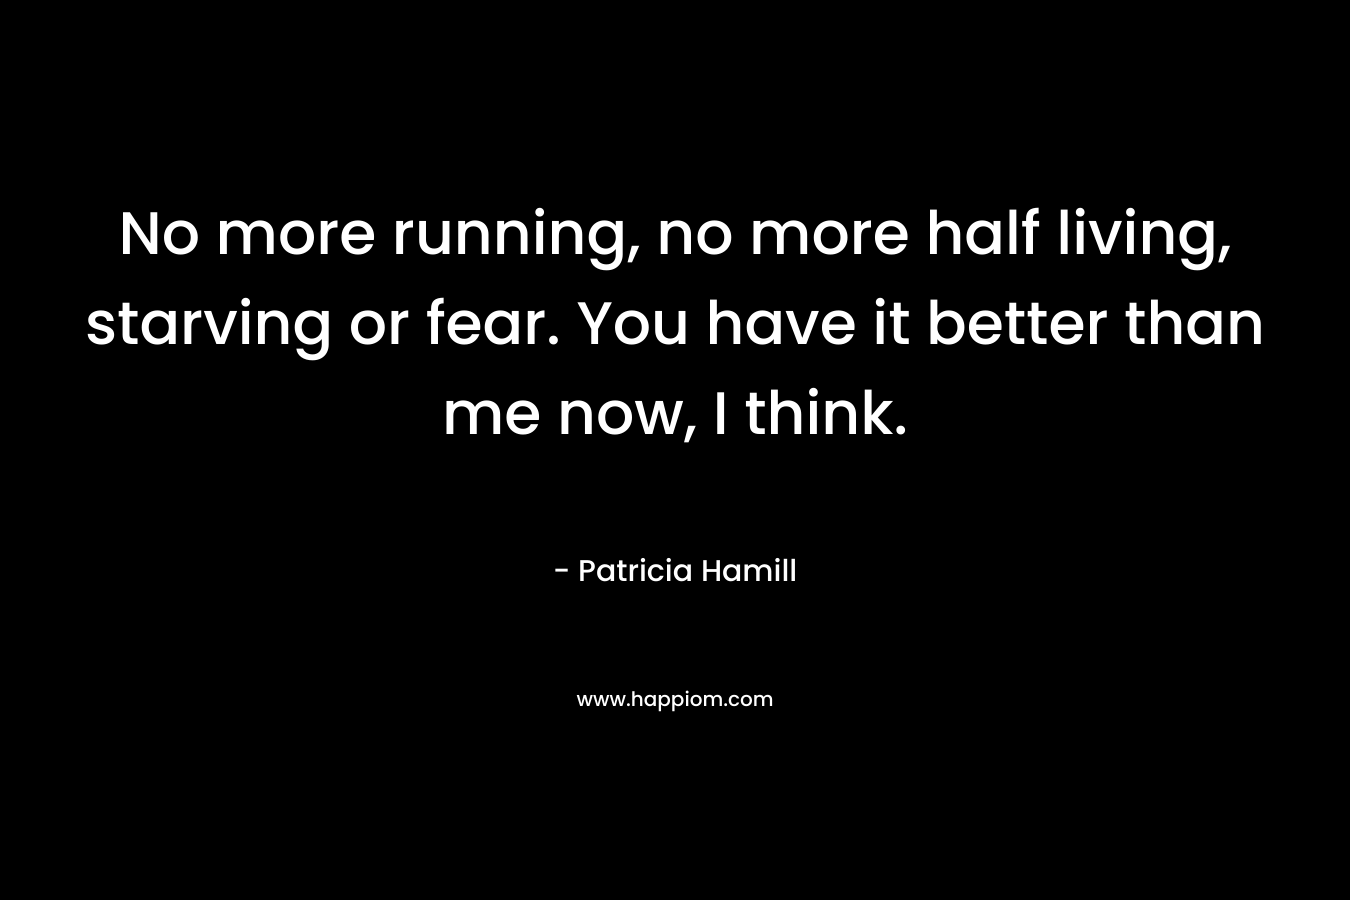 No more running, no more half living, starving or fear. You have it better than me now, I think.